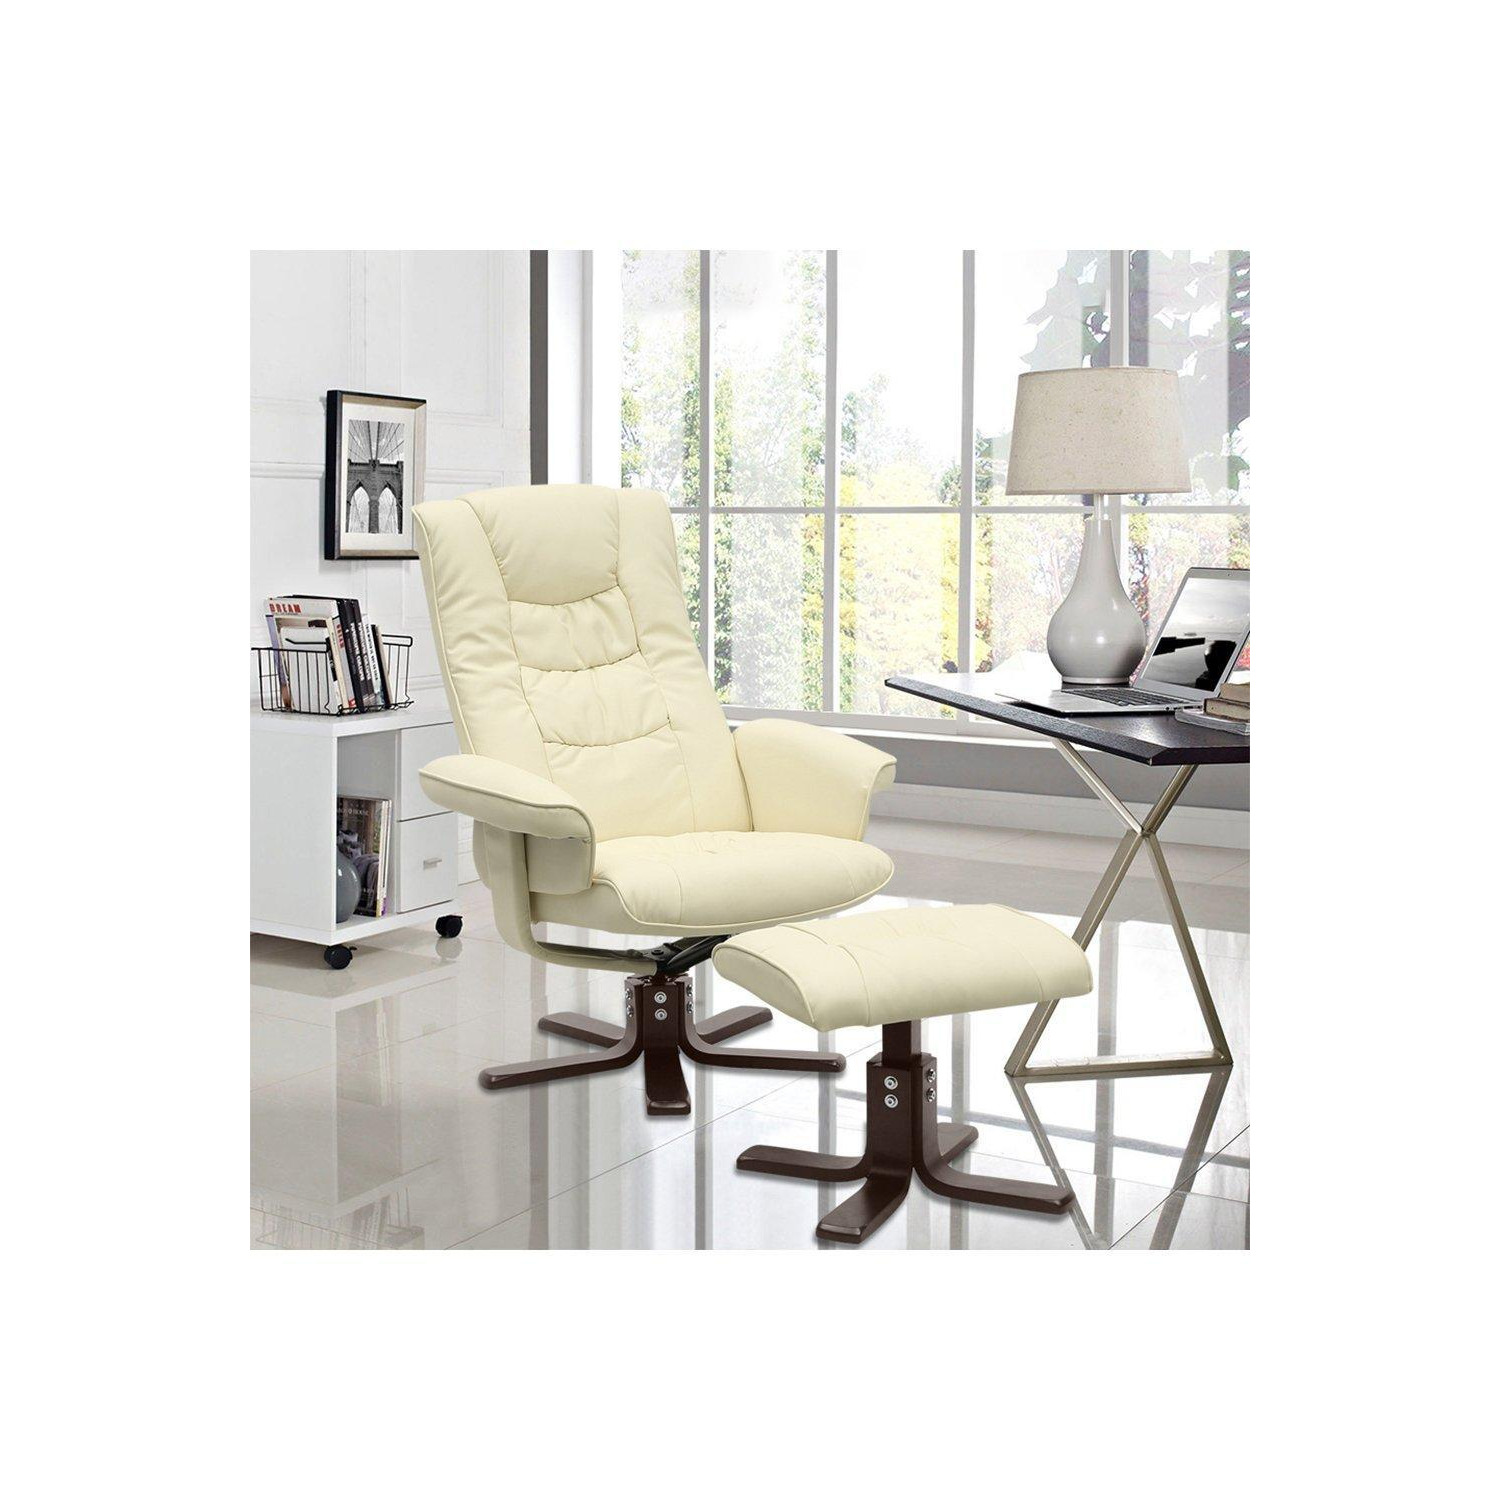 PU Leather Swivel Chair Recliner Armchair With Footstool - image 1